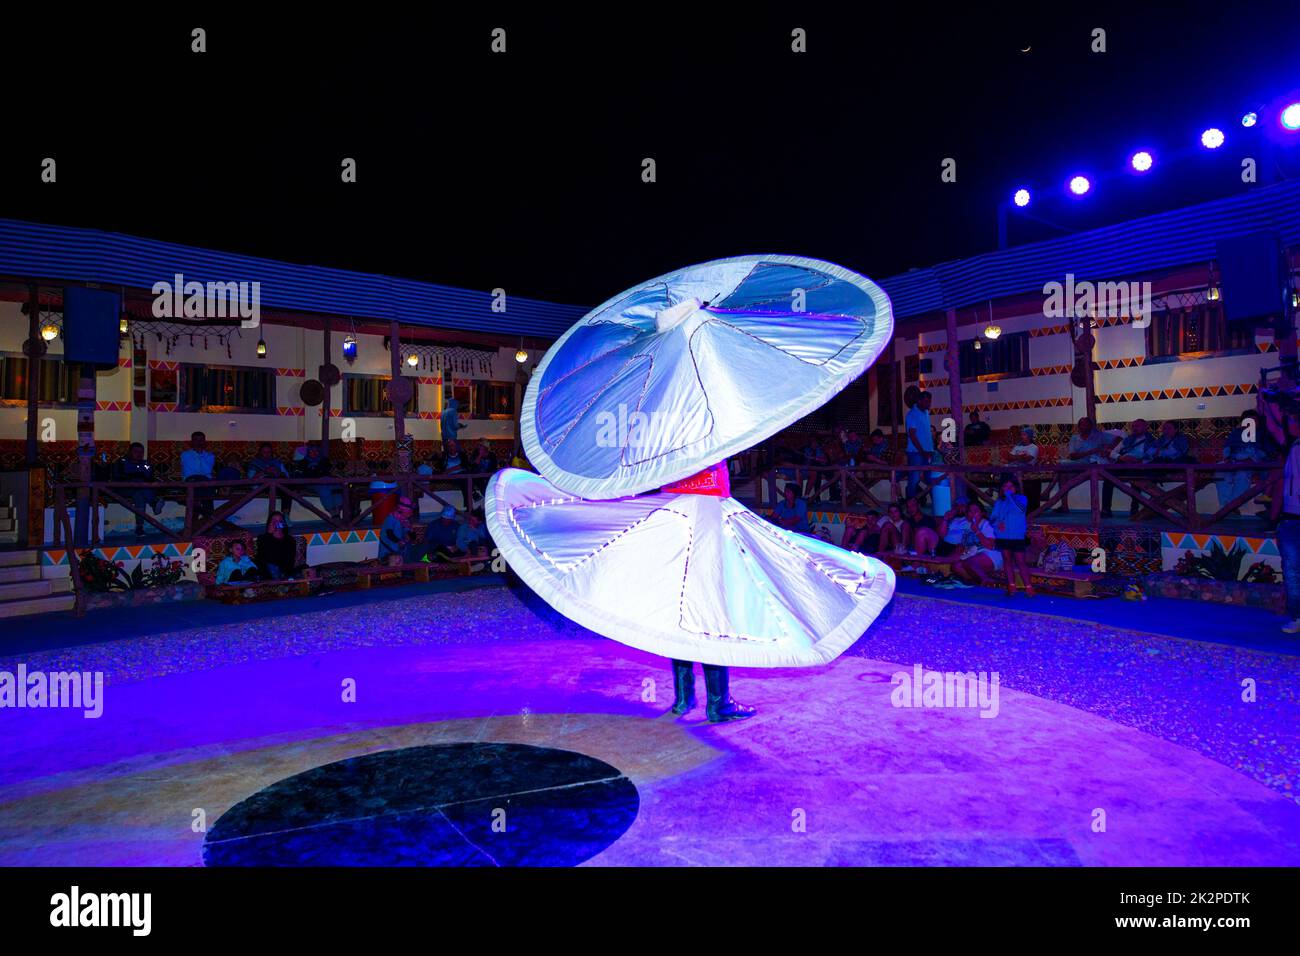 An Egypt show of a whirling dervish with a traditional custome at night Stock Photo